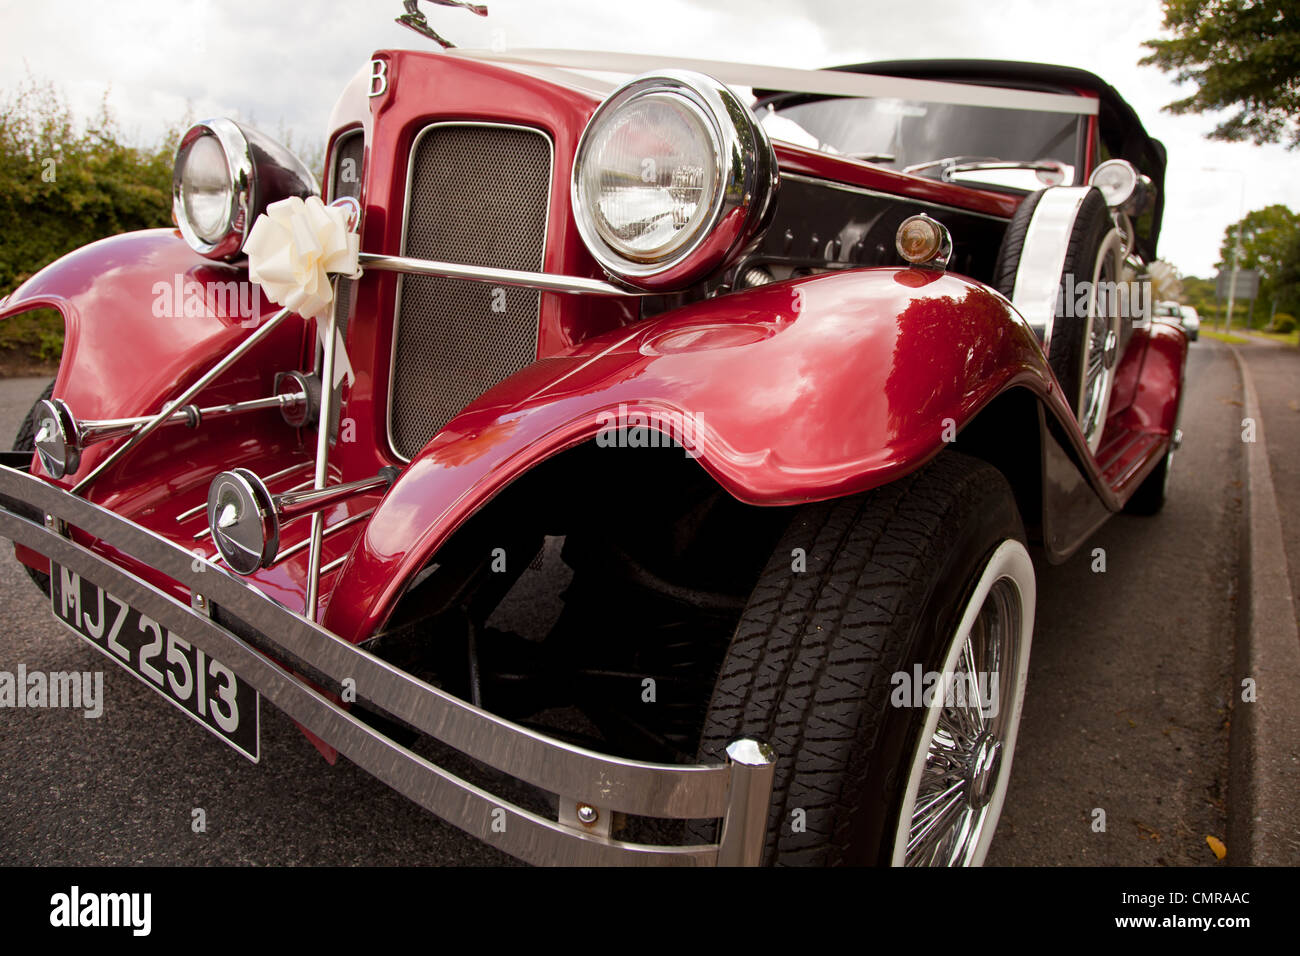 Beaufort sports car used for weddings. Stock Photo